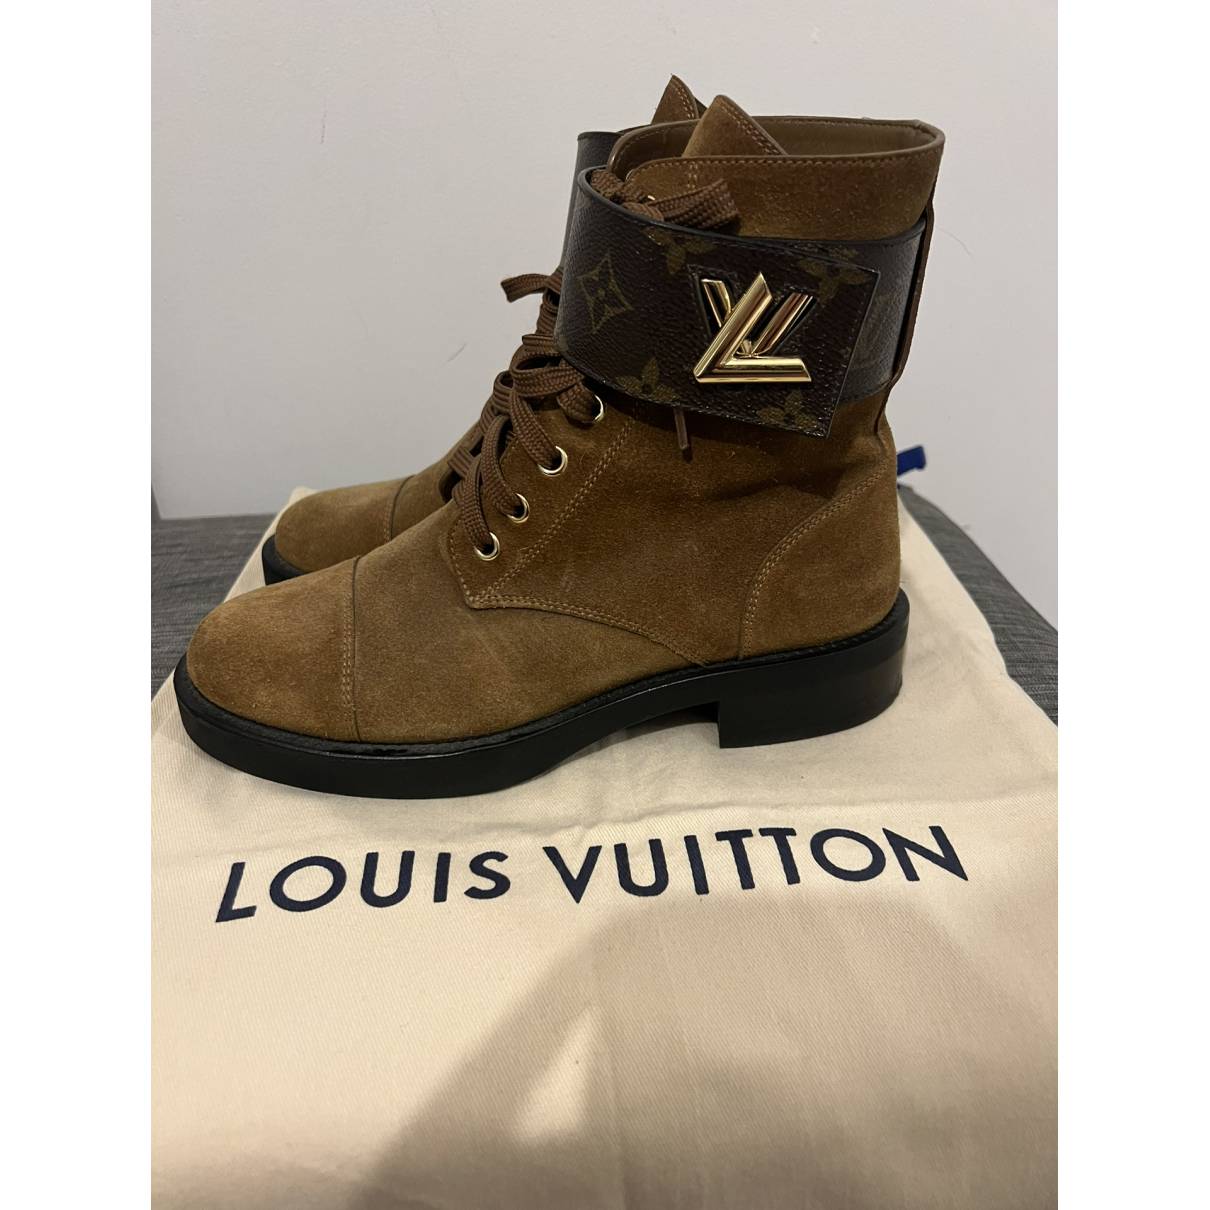 Louis Vuitton - Authenticated Wonderland Ankle Boots - Leather Brown Plain For Woman, Very Good condition